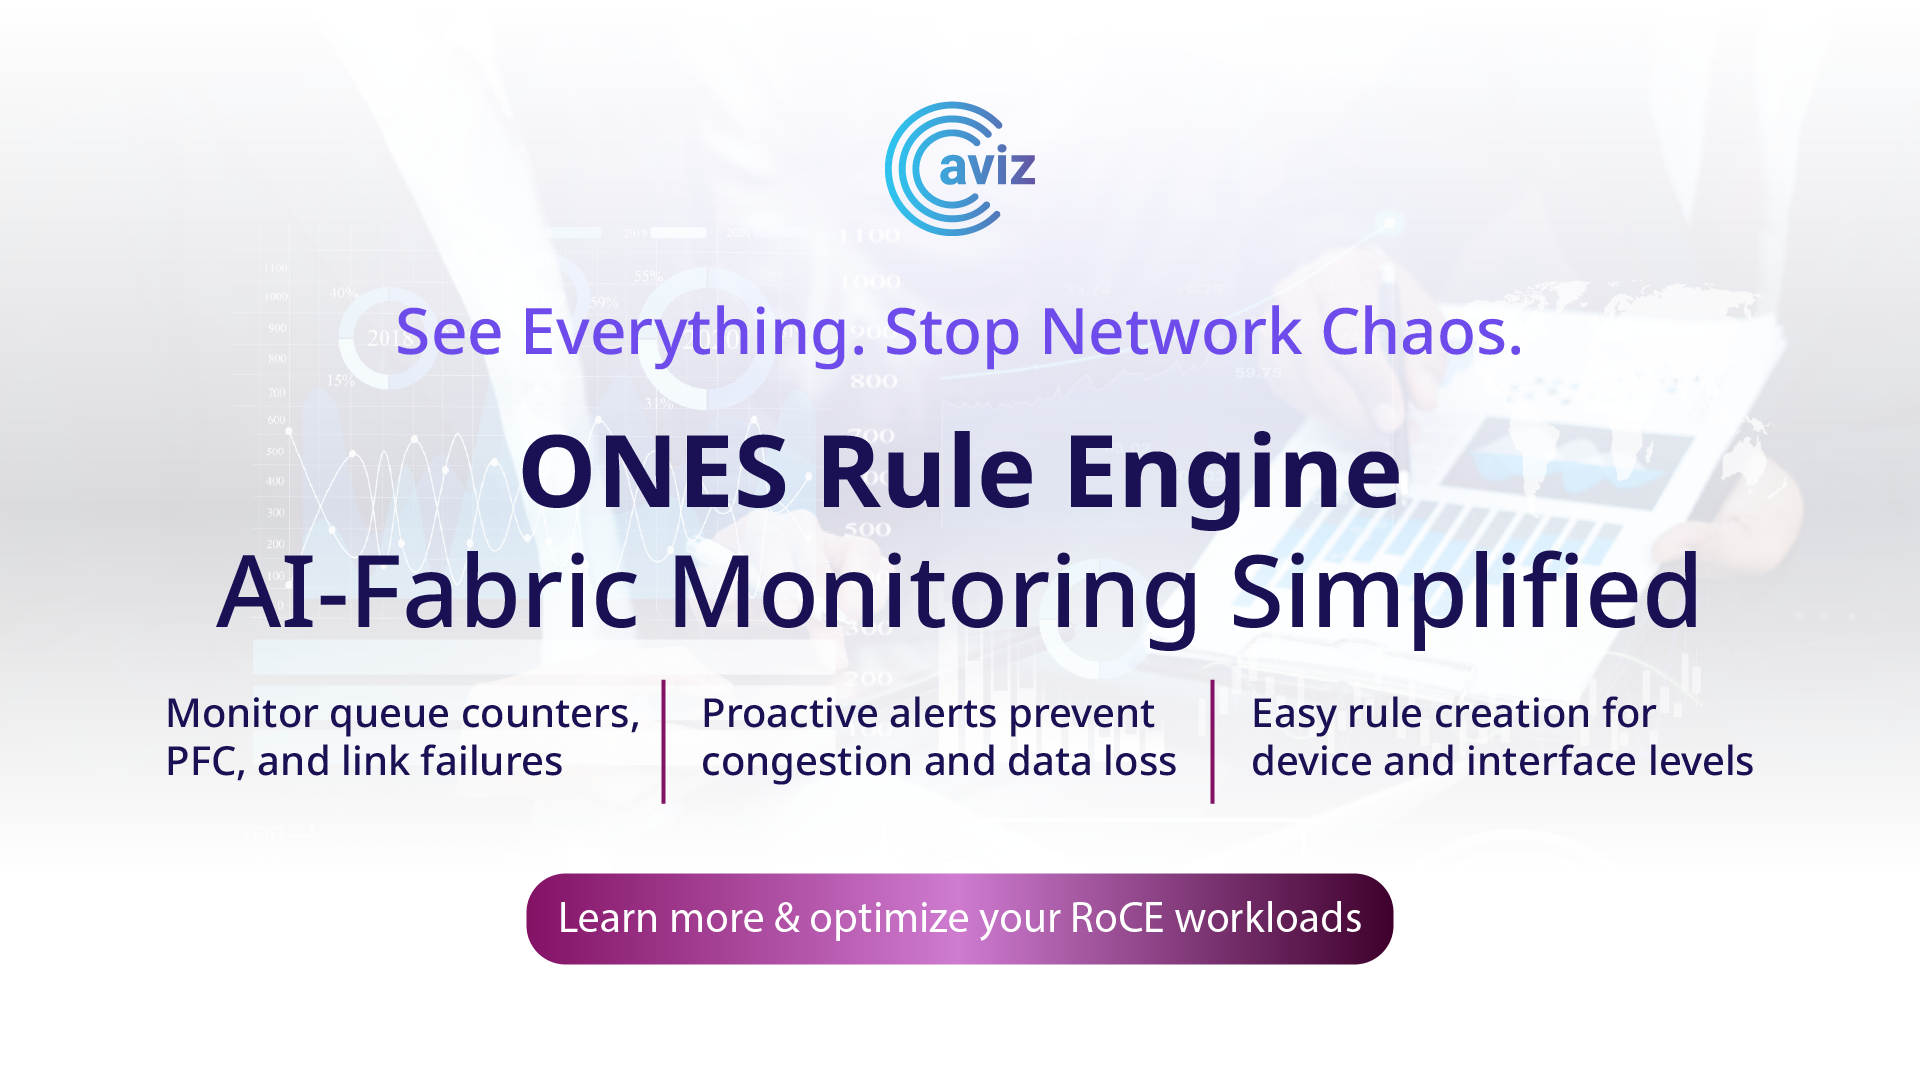 ONES Rule Engine: Enhanced Monitoring and Alerting for AI-Fabric